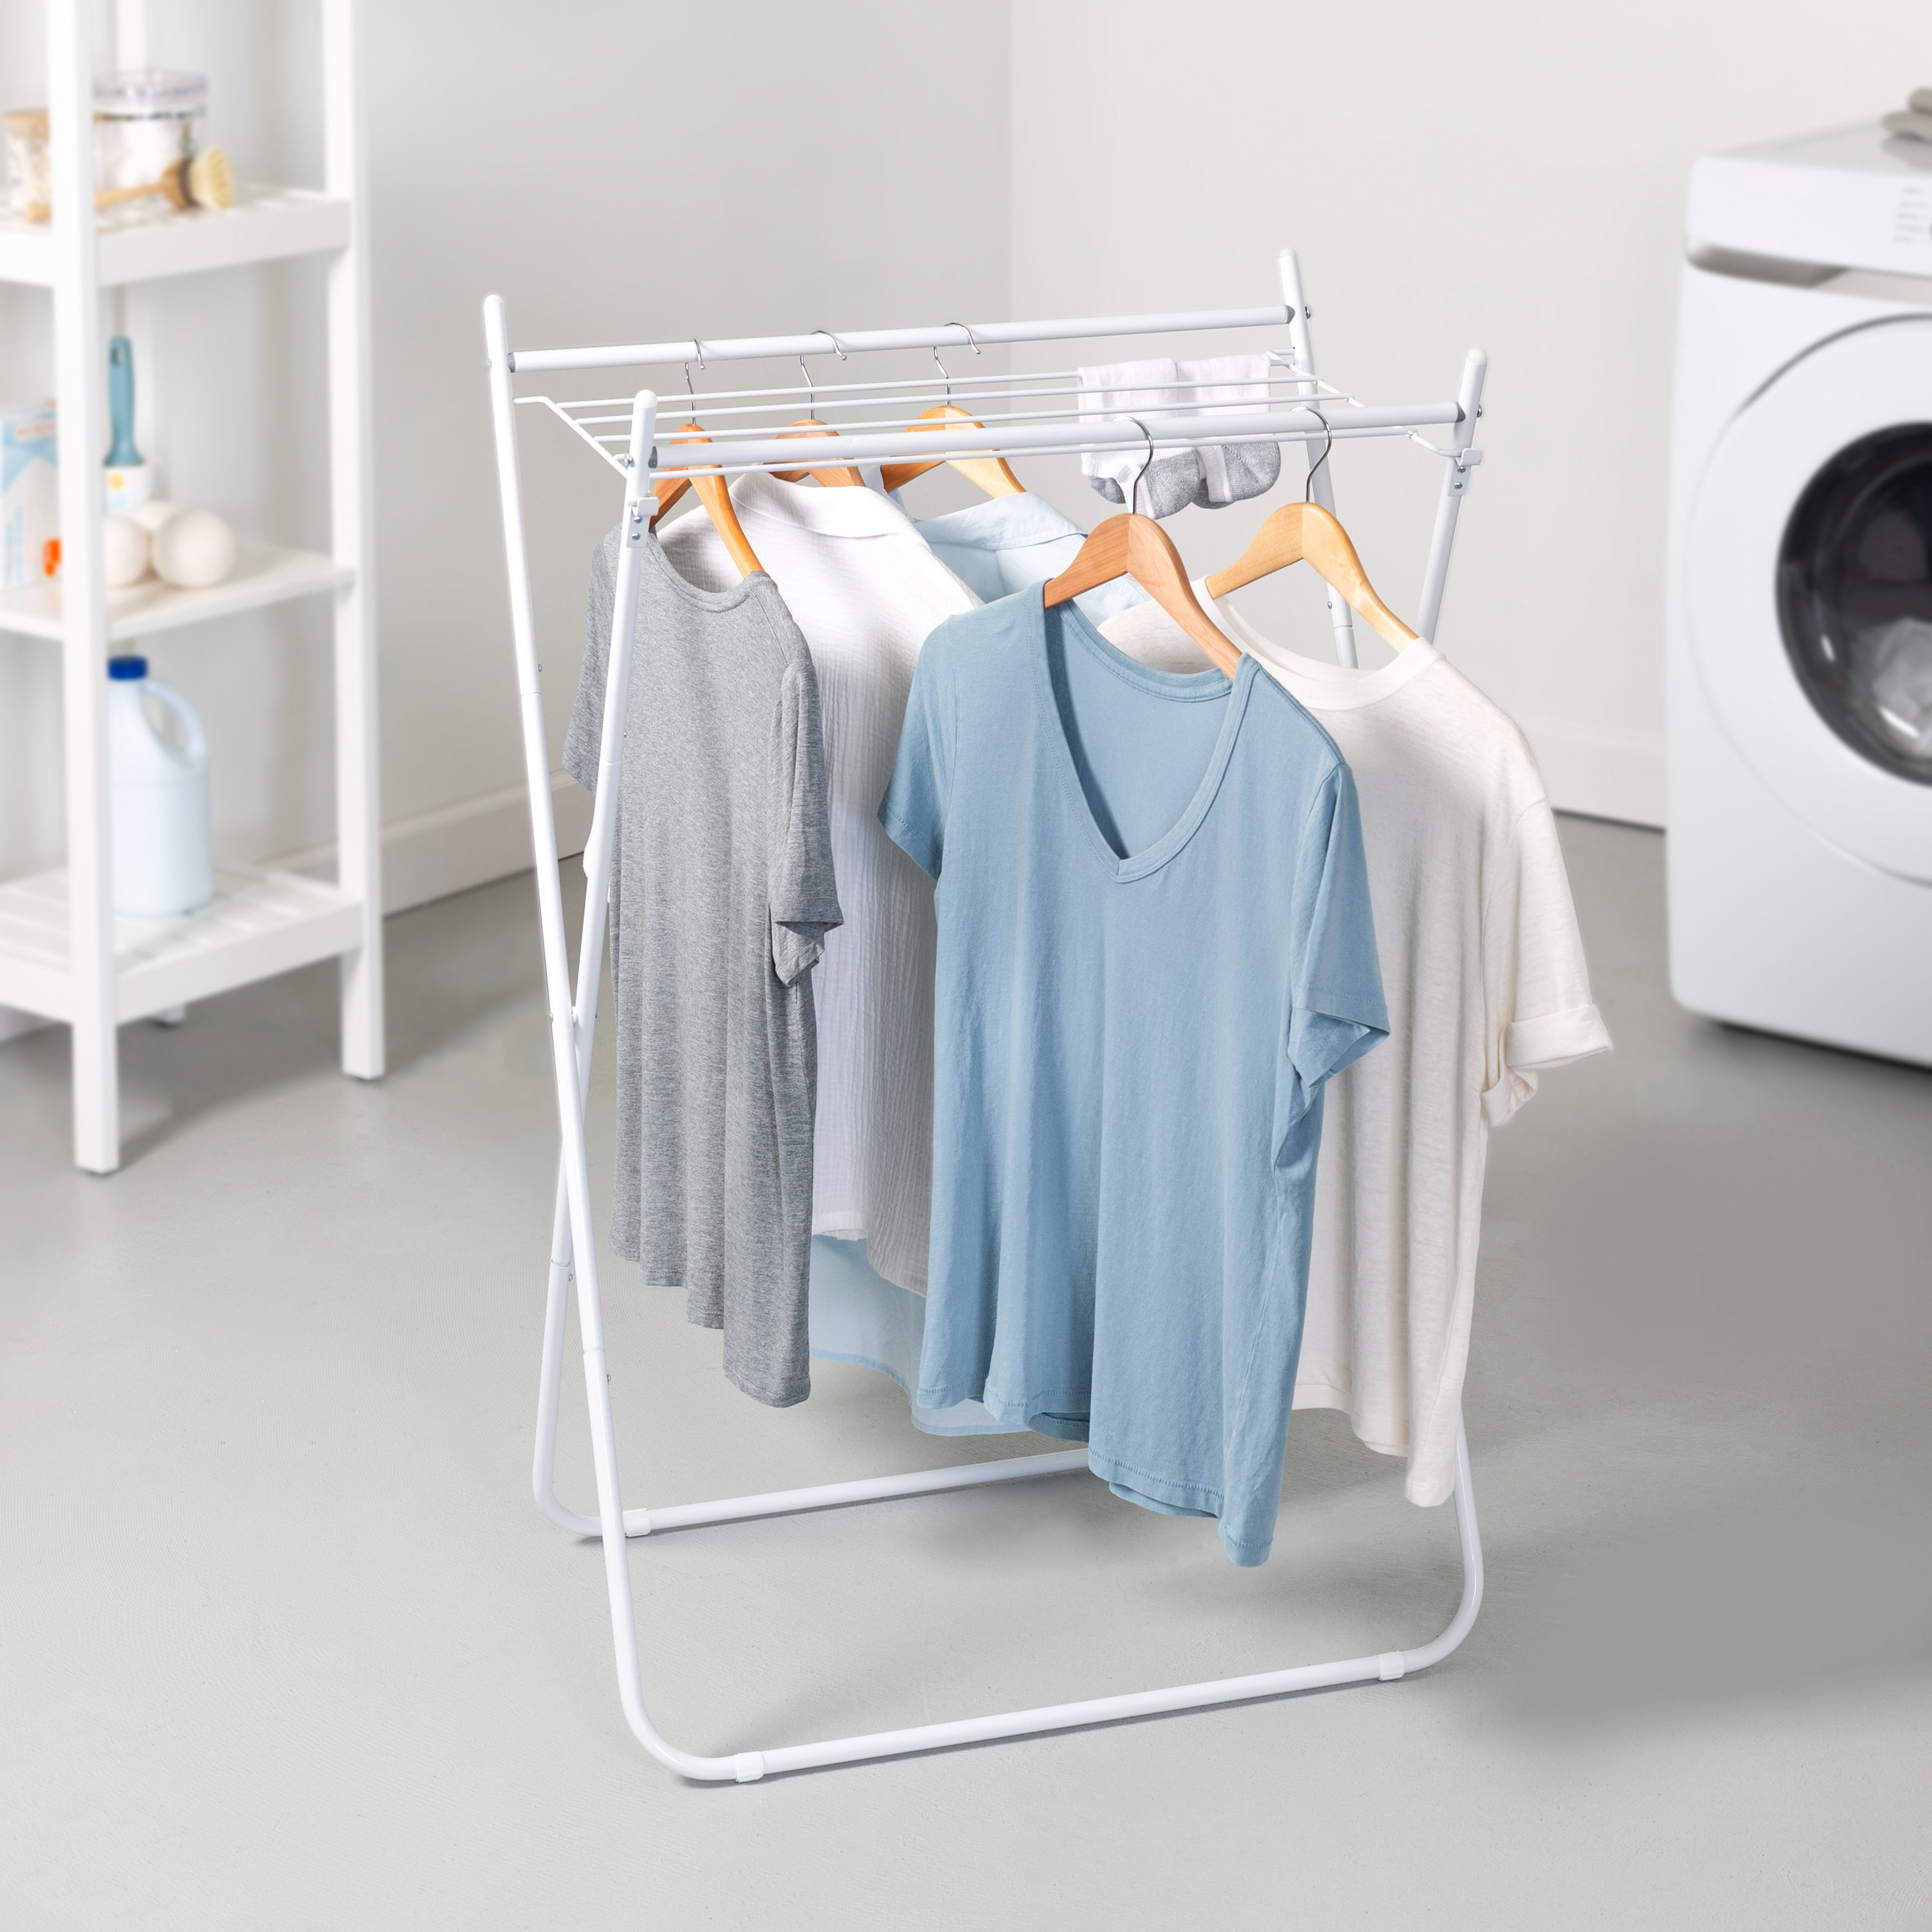 10 Space-Saving Drying Racks for Small Spaces  Drying rack laundry,  Laundry room drying rack, Diy clothes drying rack